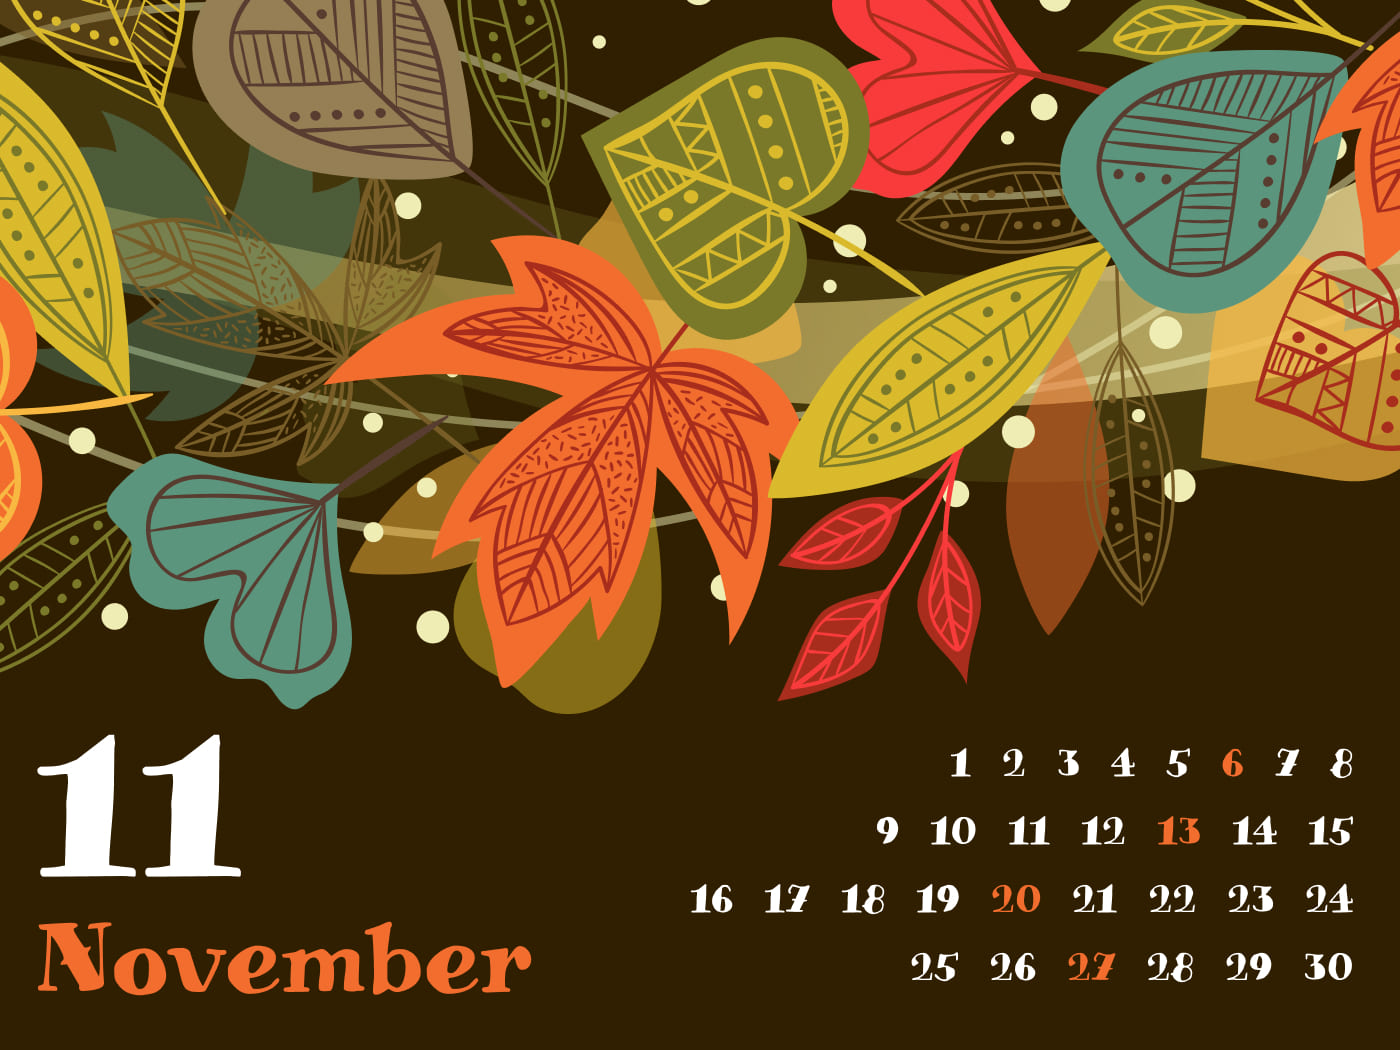 Eleventh page of the calendar for November in brown.